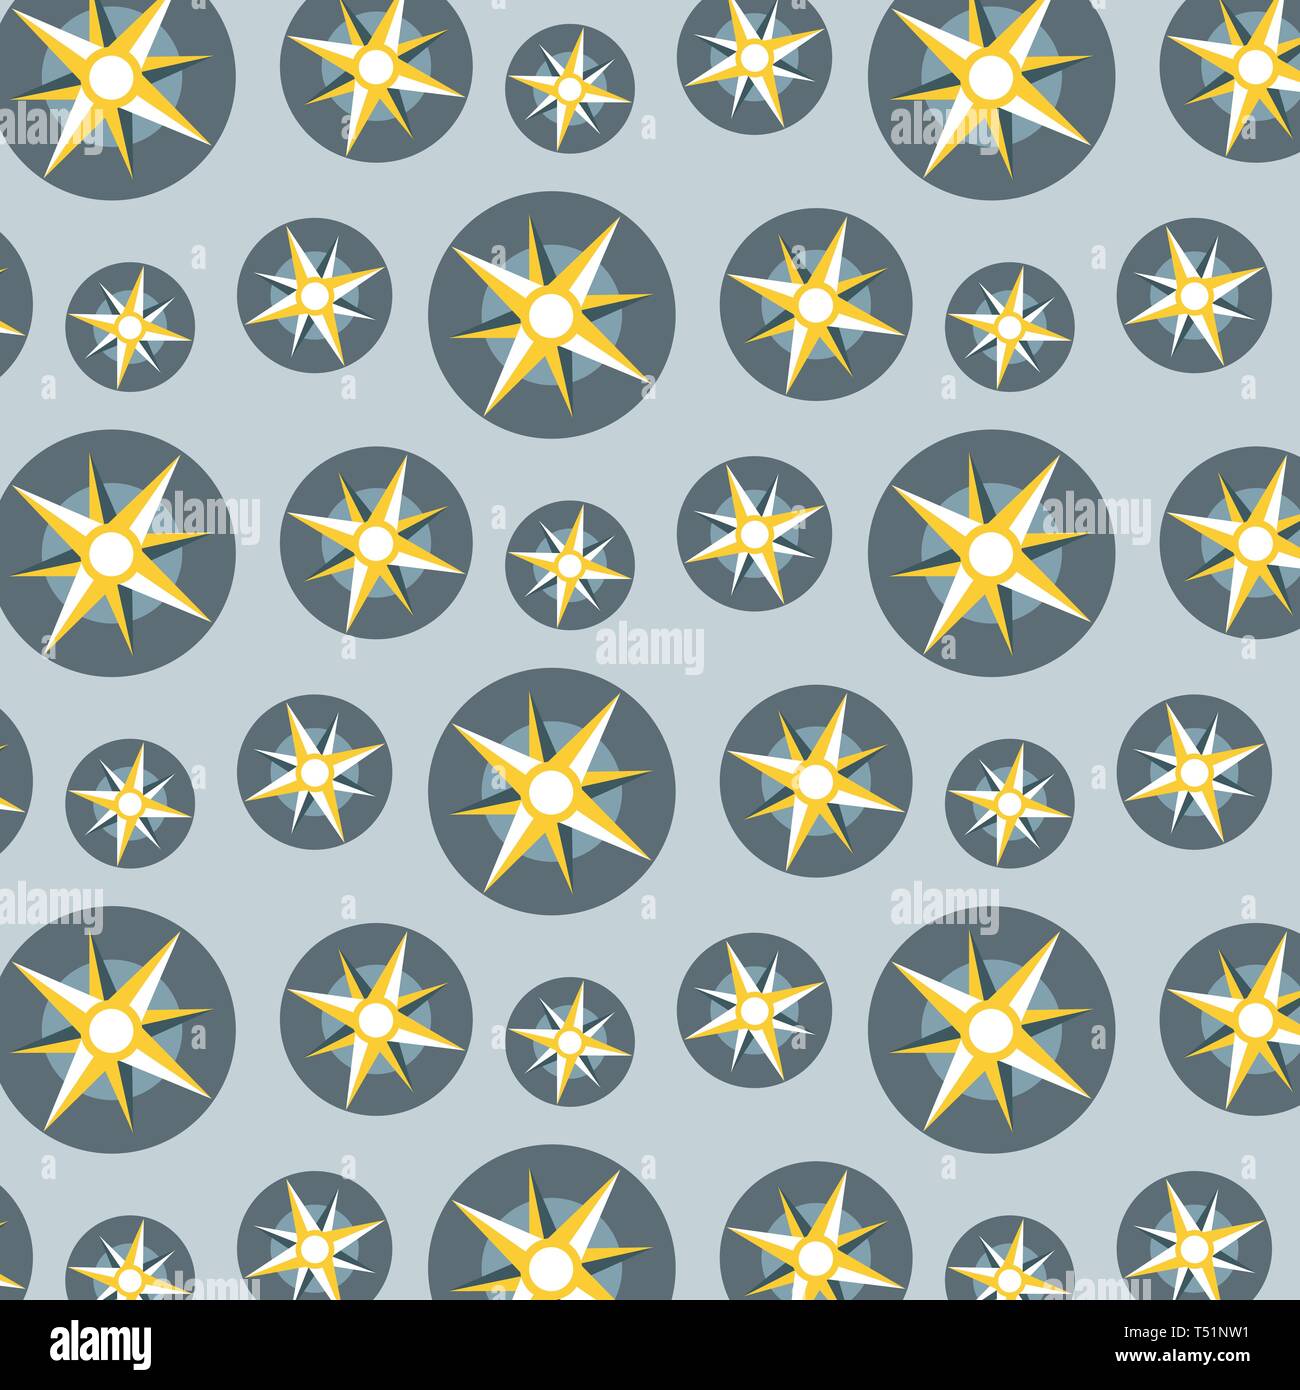 Compass vector pattern in gold color and gray background Stock Vector